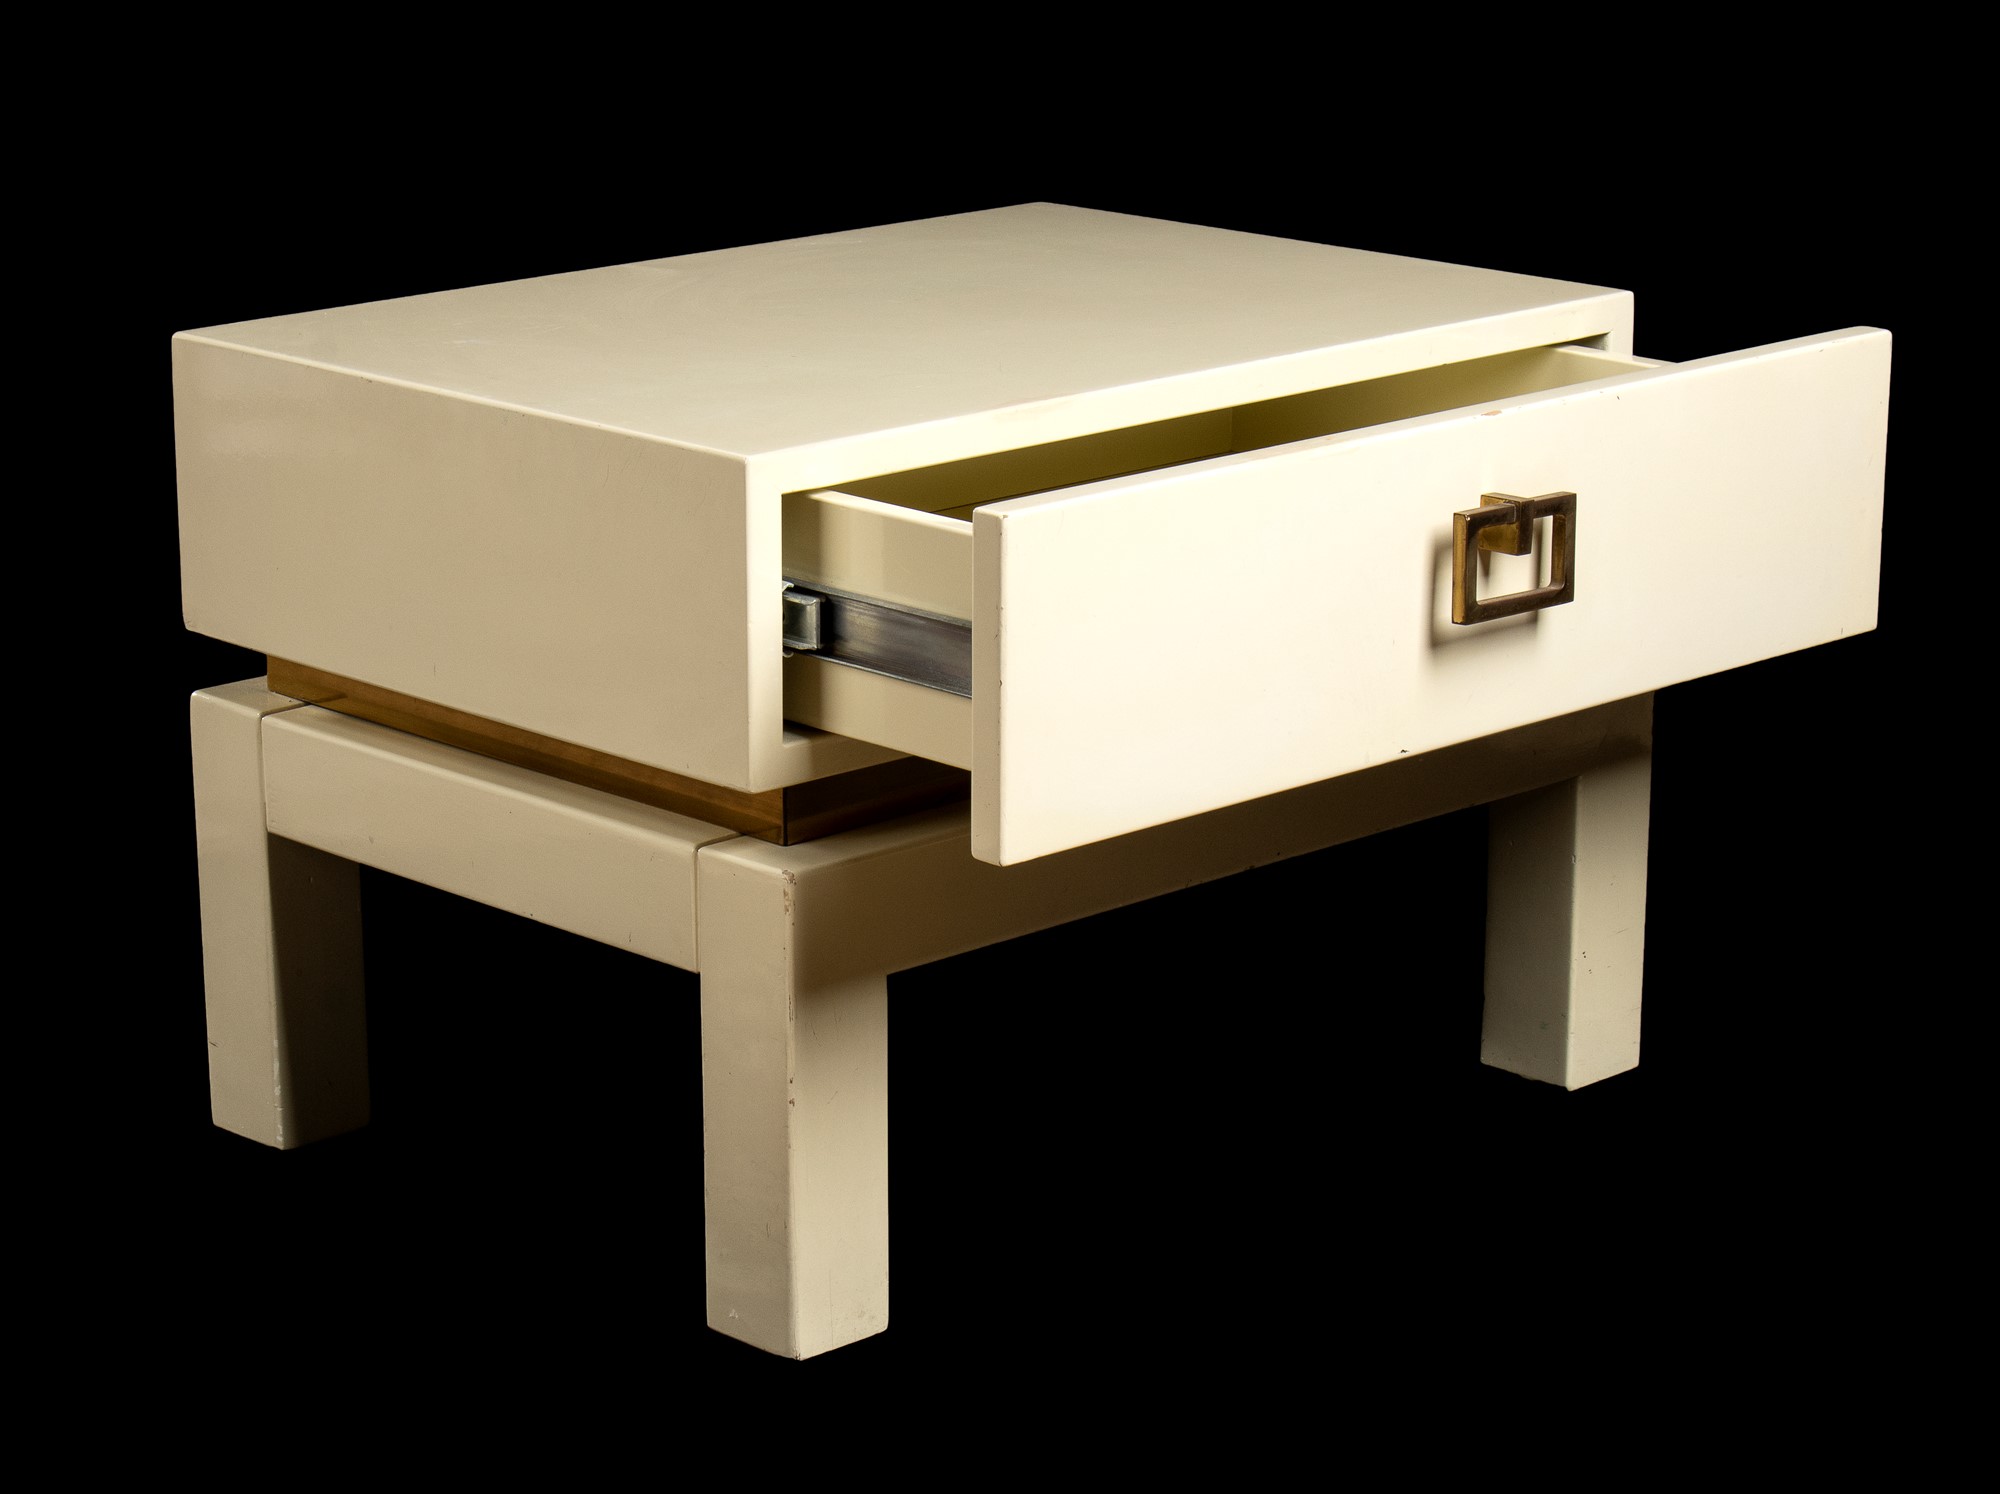 Pair of bedside tables in lacquered wood with brass handles - Image 13 of 27